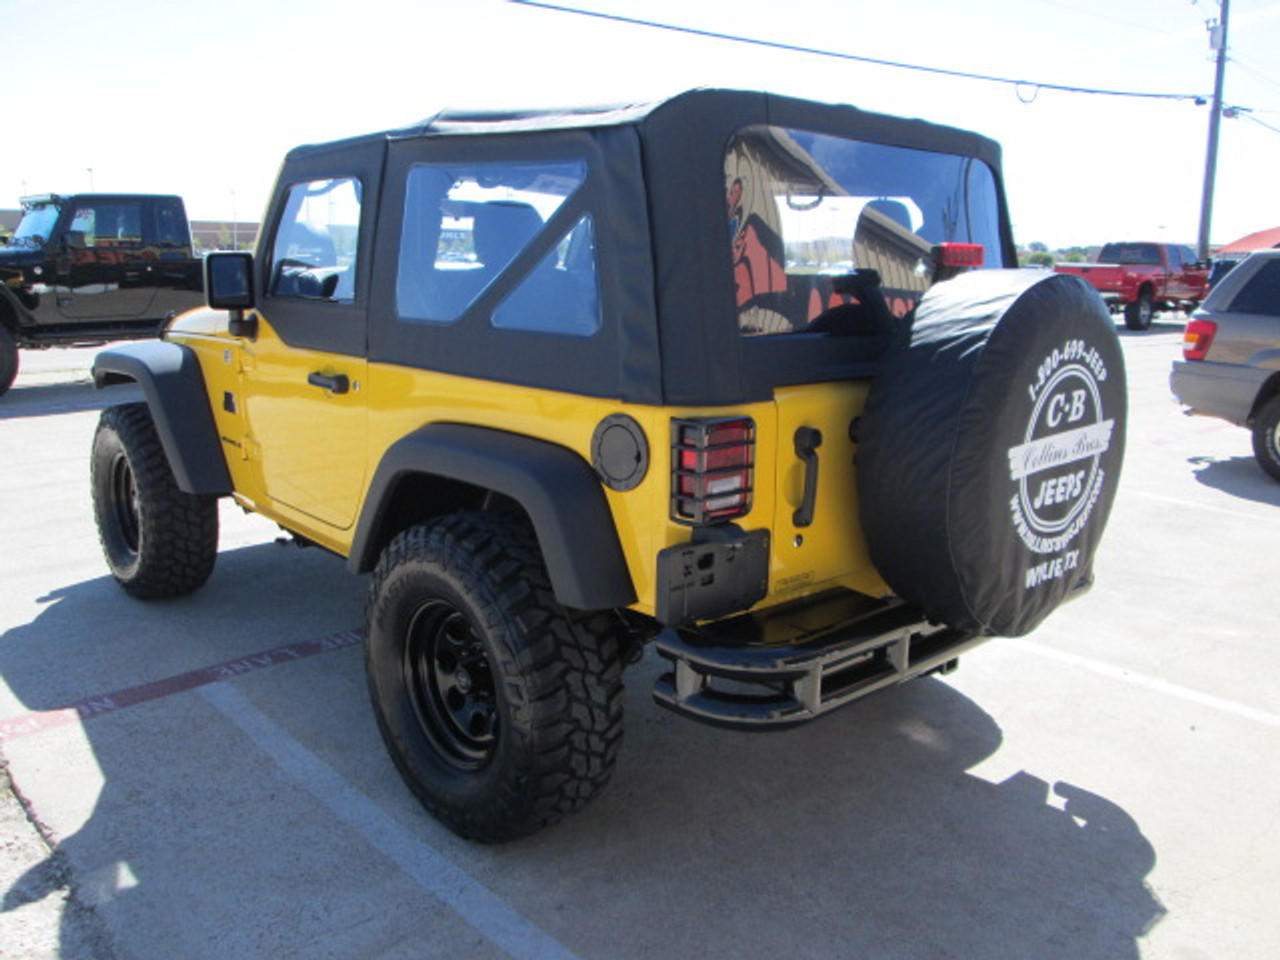 SOLD 2015 Black Mountain Conversions 2DR Jeep Wrangler Stock# 539672